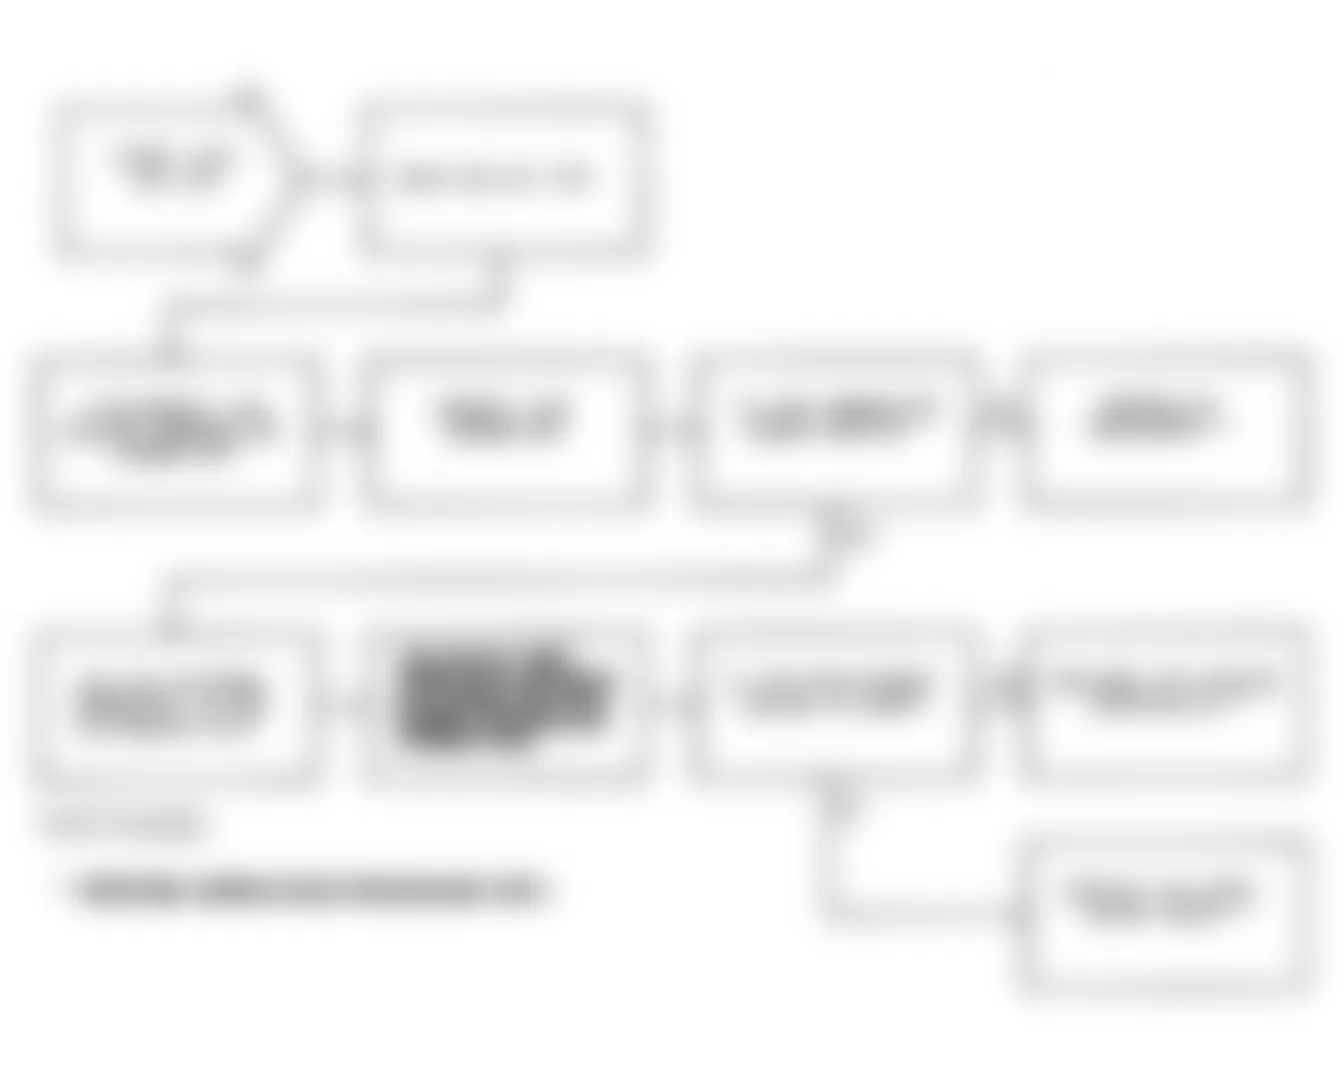 Chrysler New Yorker Fifth Avenue 1991 - Component Locations -  Test NS-13D: Flowchart